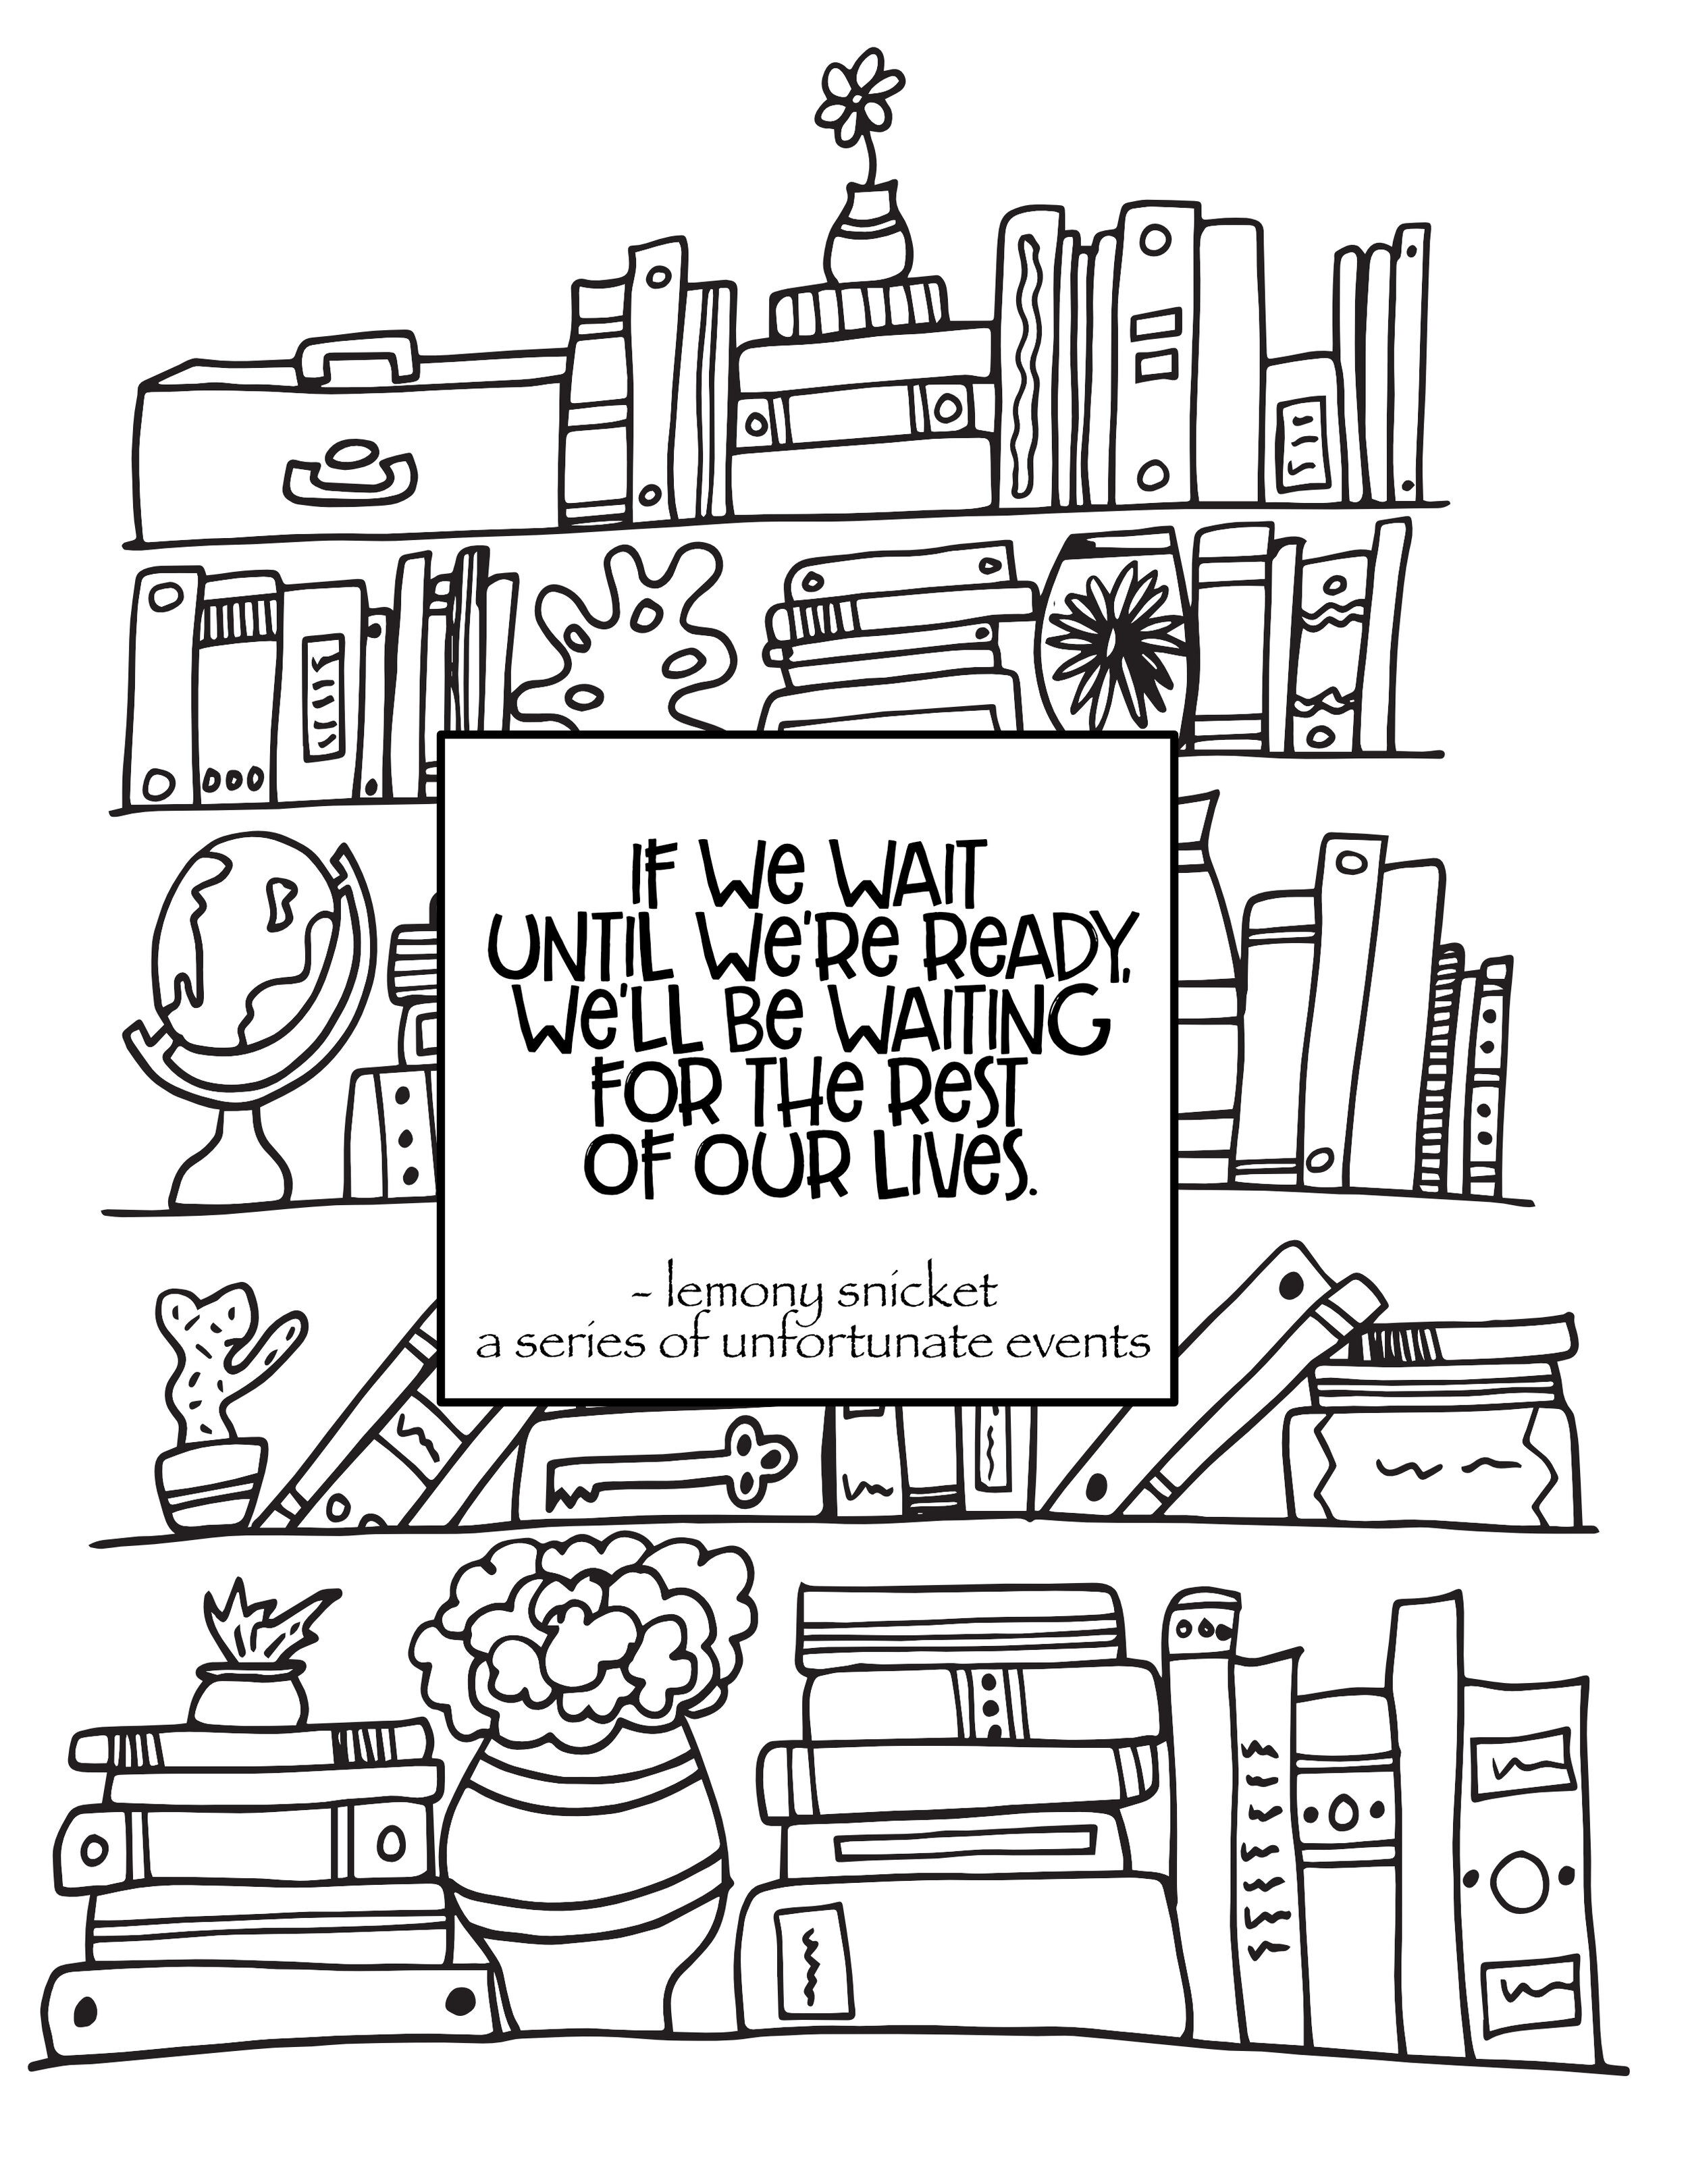 Free Coloring Page - If we wait until we’re ready, we’ll be waiting for the rest of our lives - Lemony Snicket. Free printable bookshelf with quote coloring page